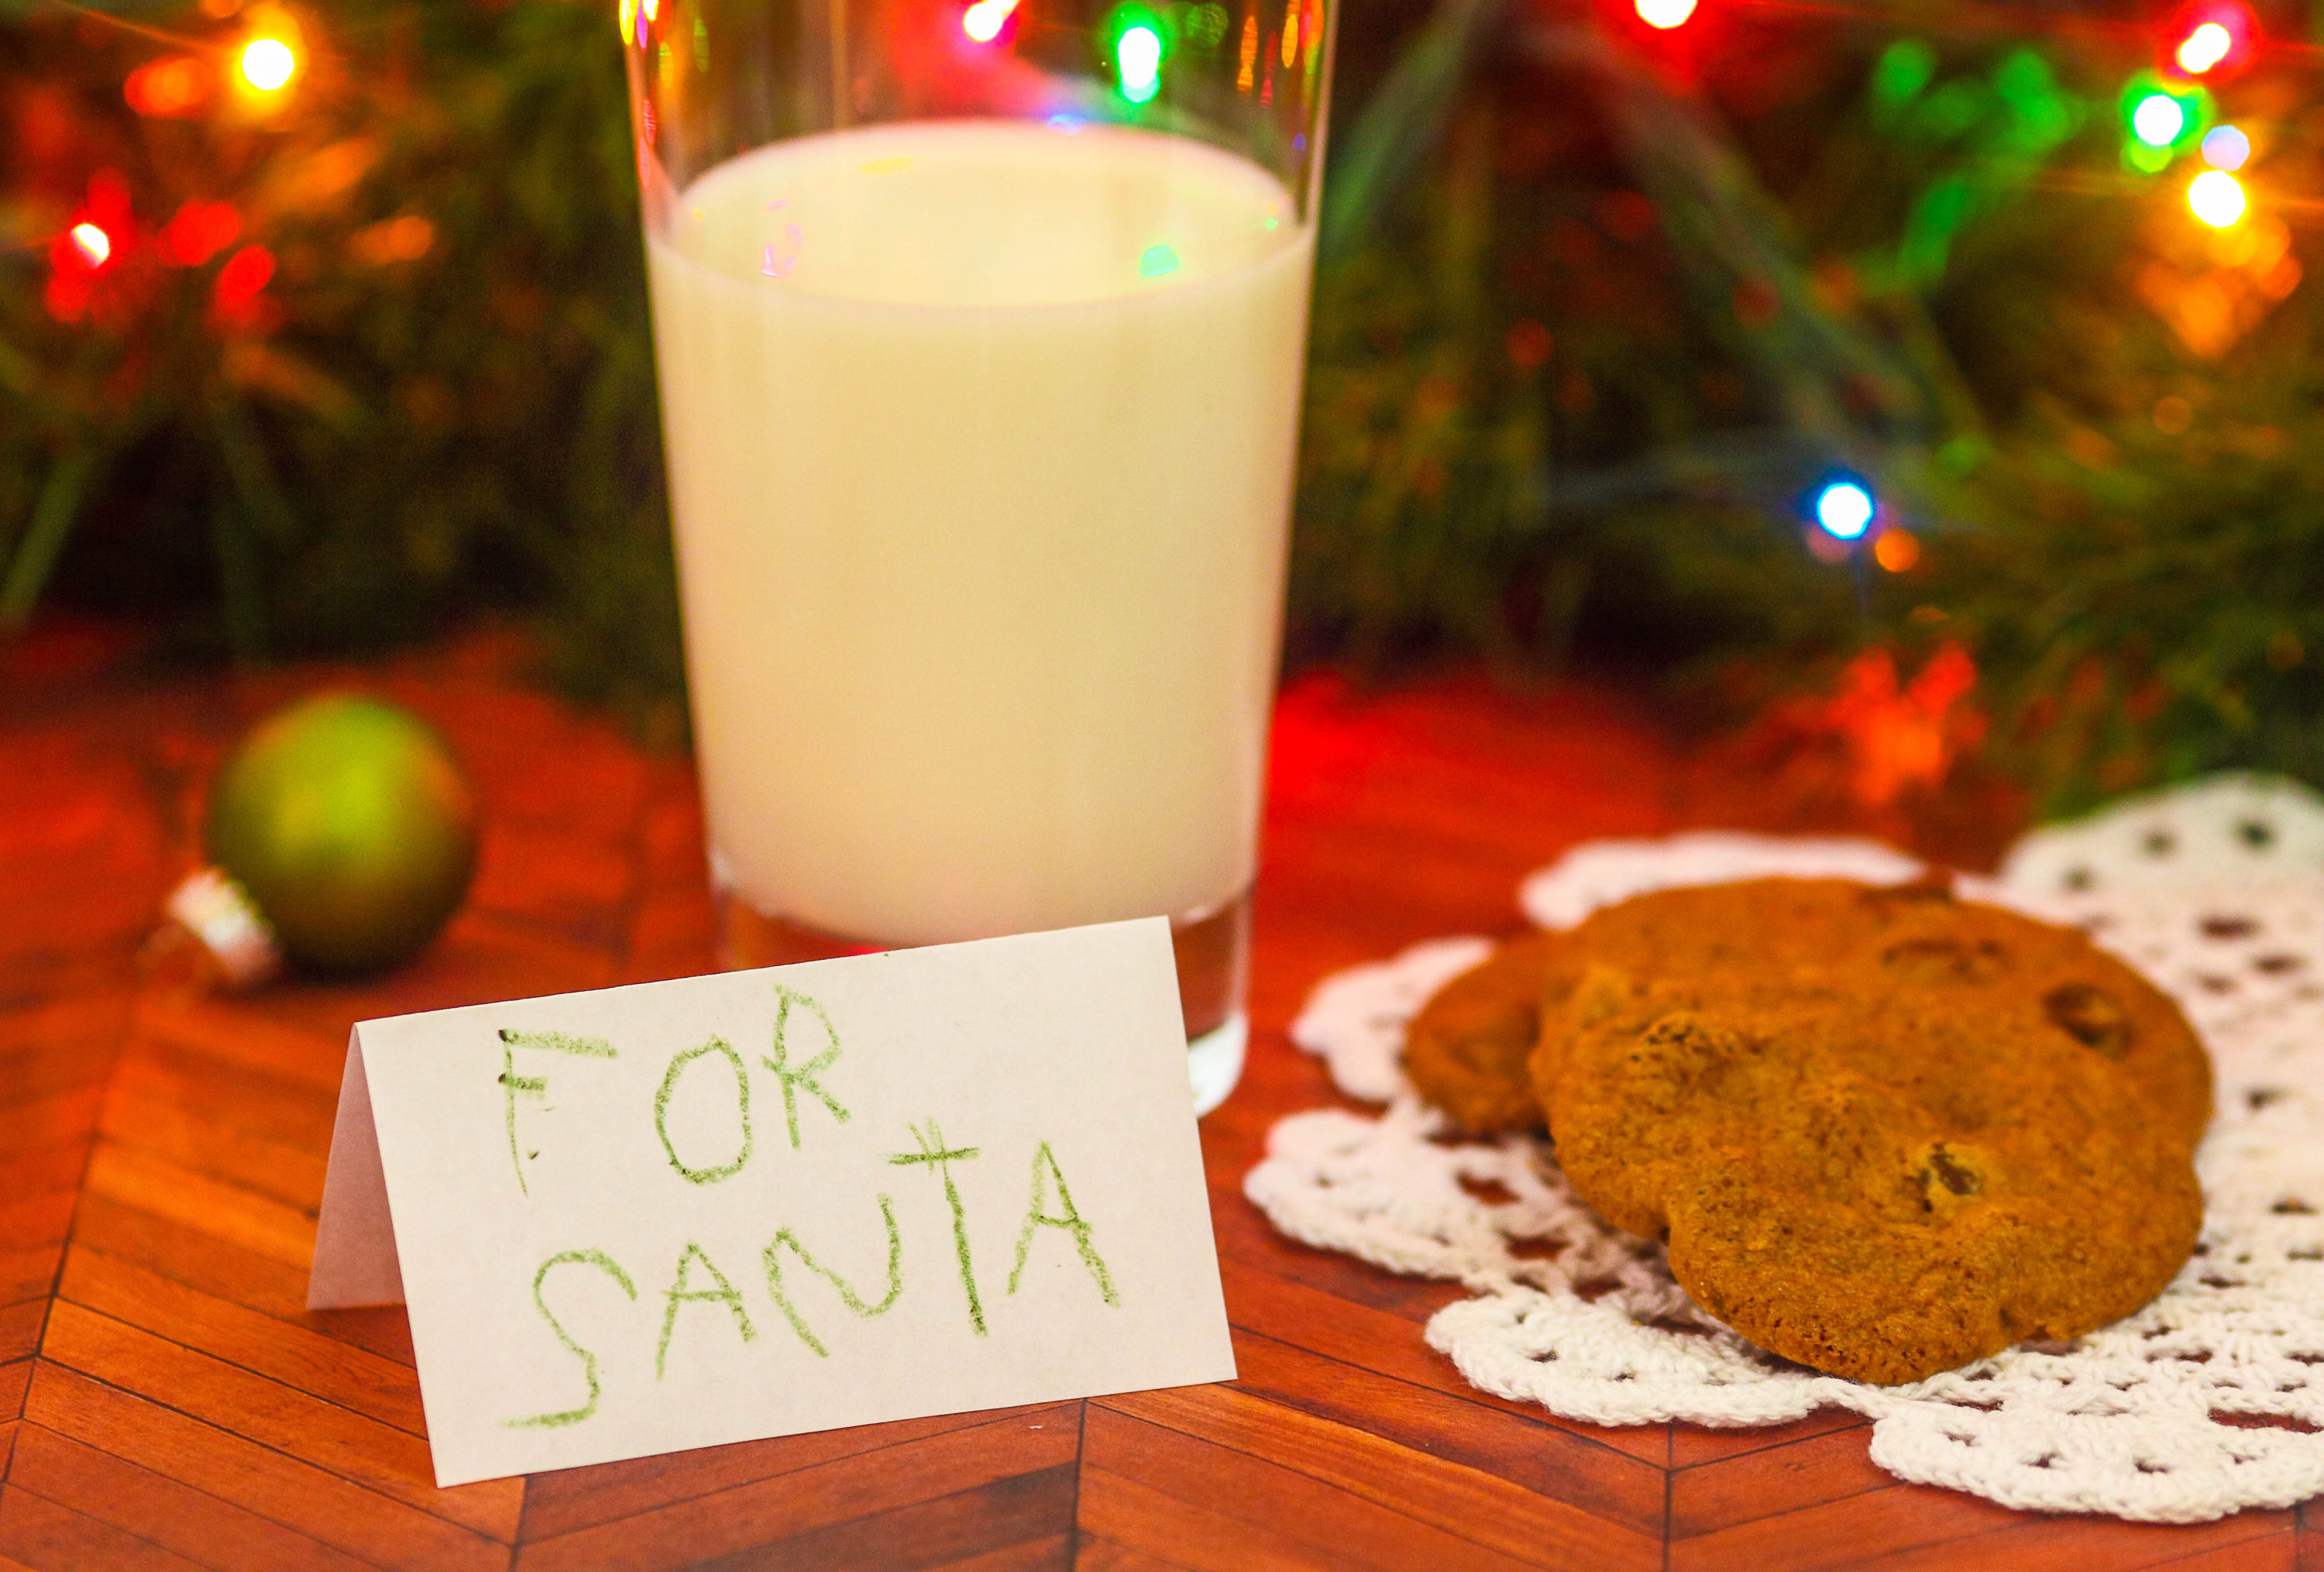 Leaving cookies and milk for Santa Claus - The practice of leaving cookies and milk for Santa Claus is a Christmas Eve tradition.